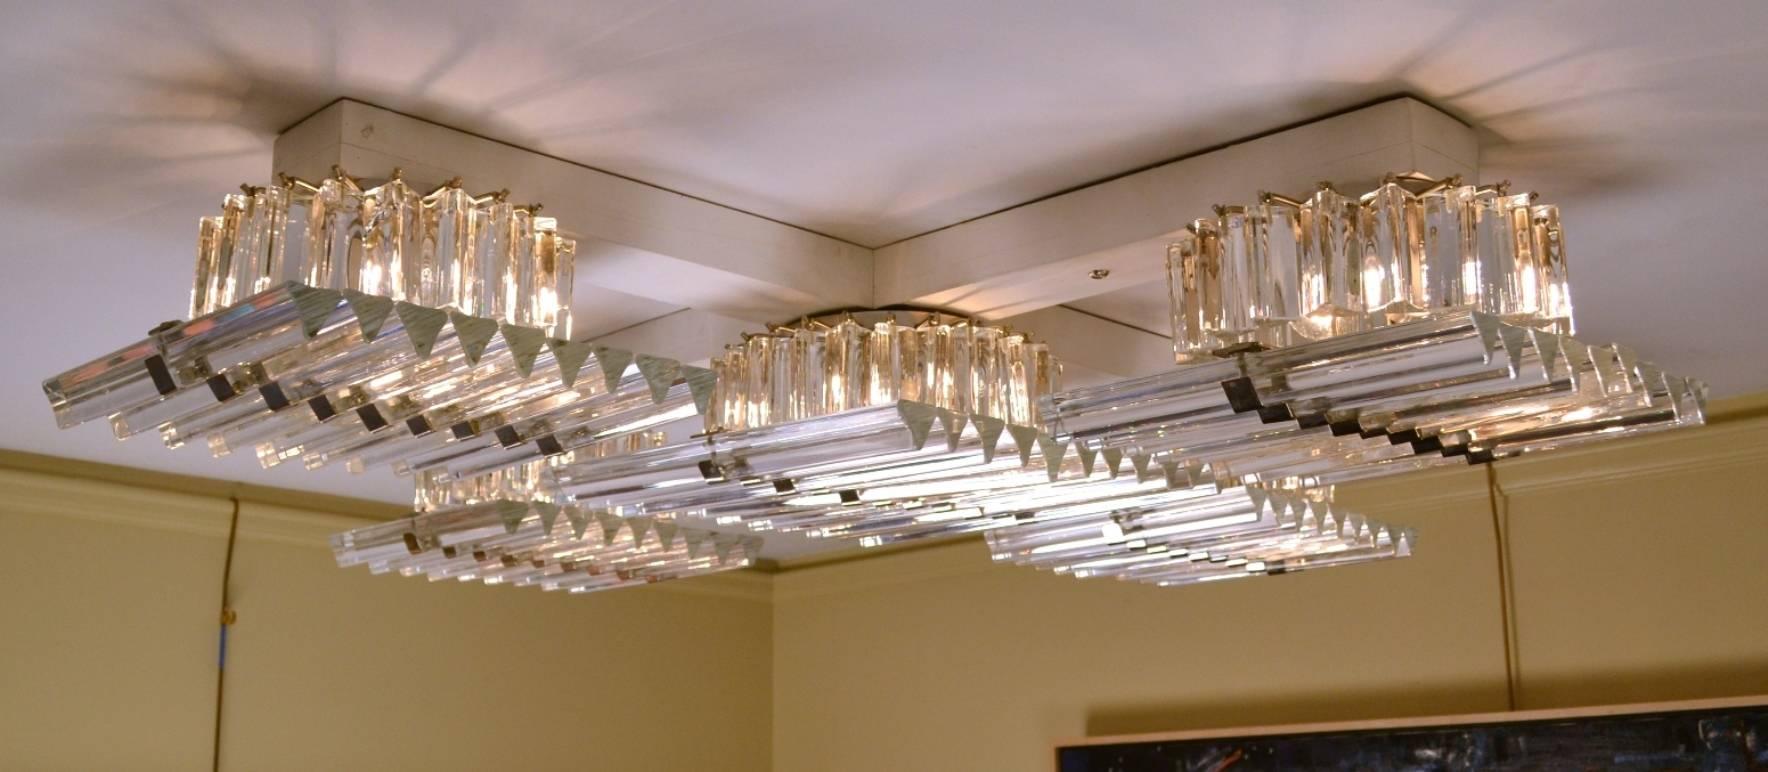 Five Murano glass light fixtures, each made from triangular canes bound together with stainless straps; the bulbs shaded by oversized prisms. These stylish lights can be grouped together to create a single large unit as shown above, or purchased